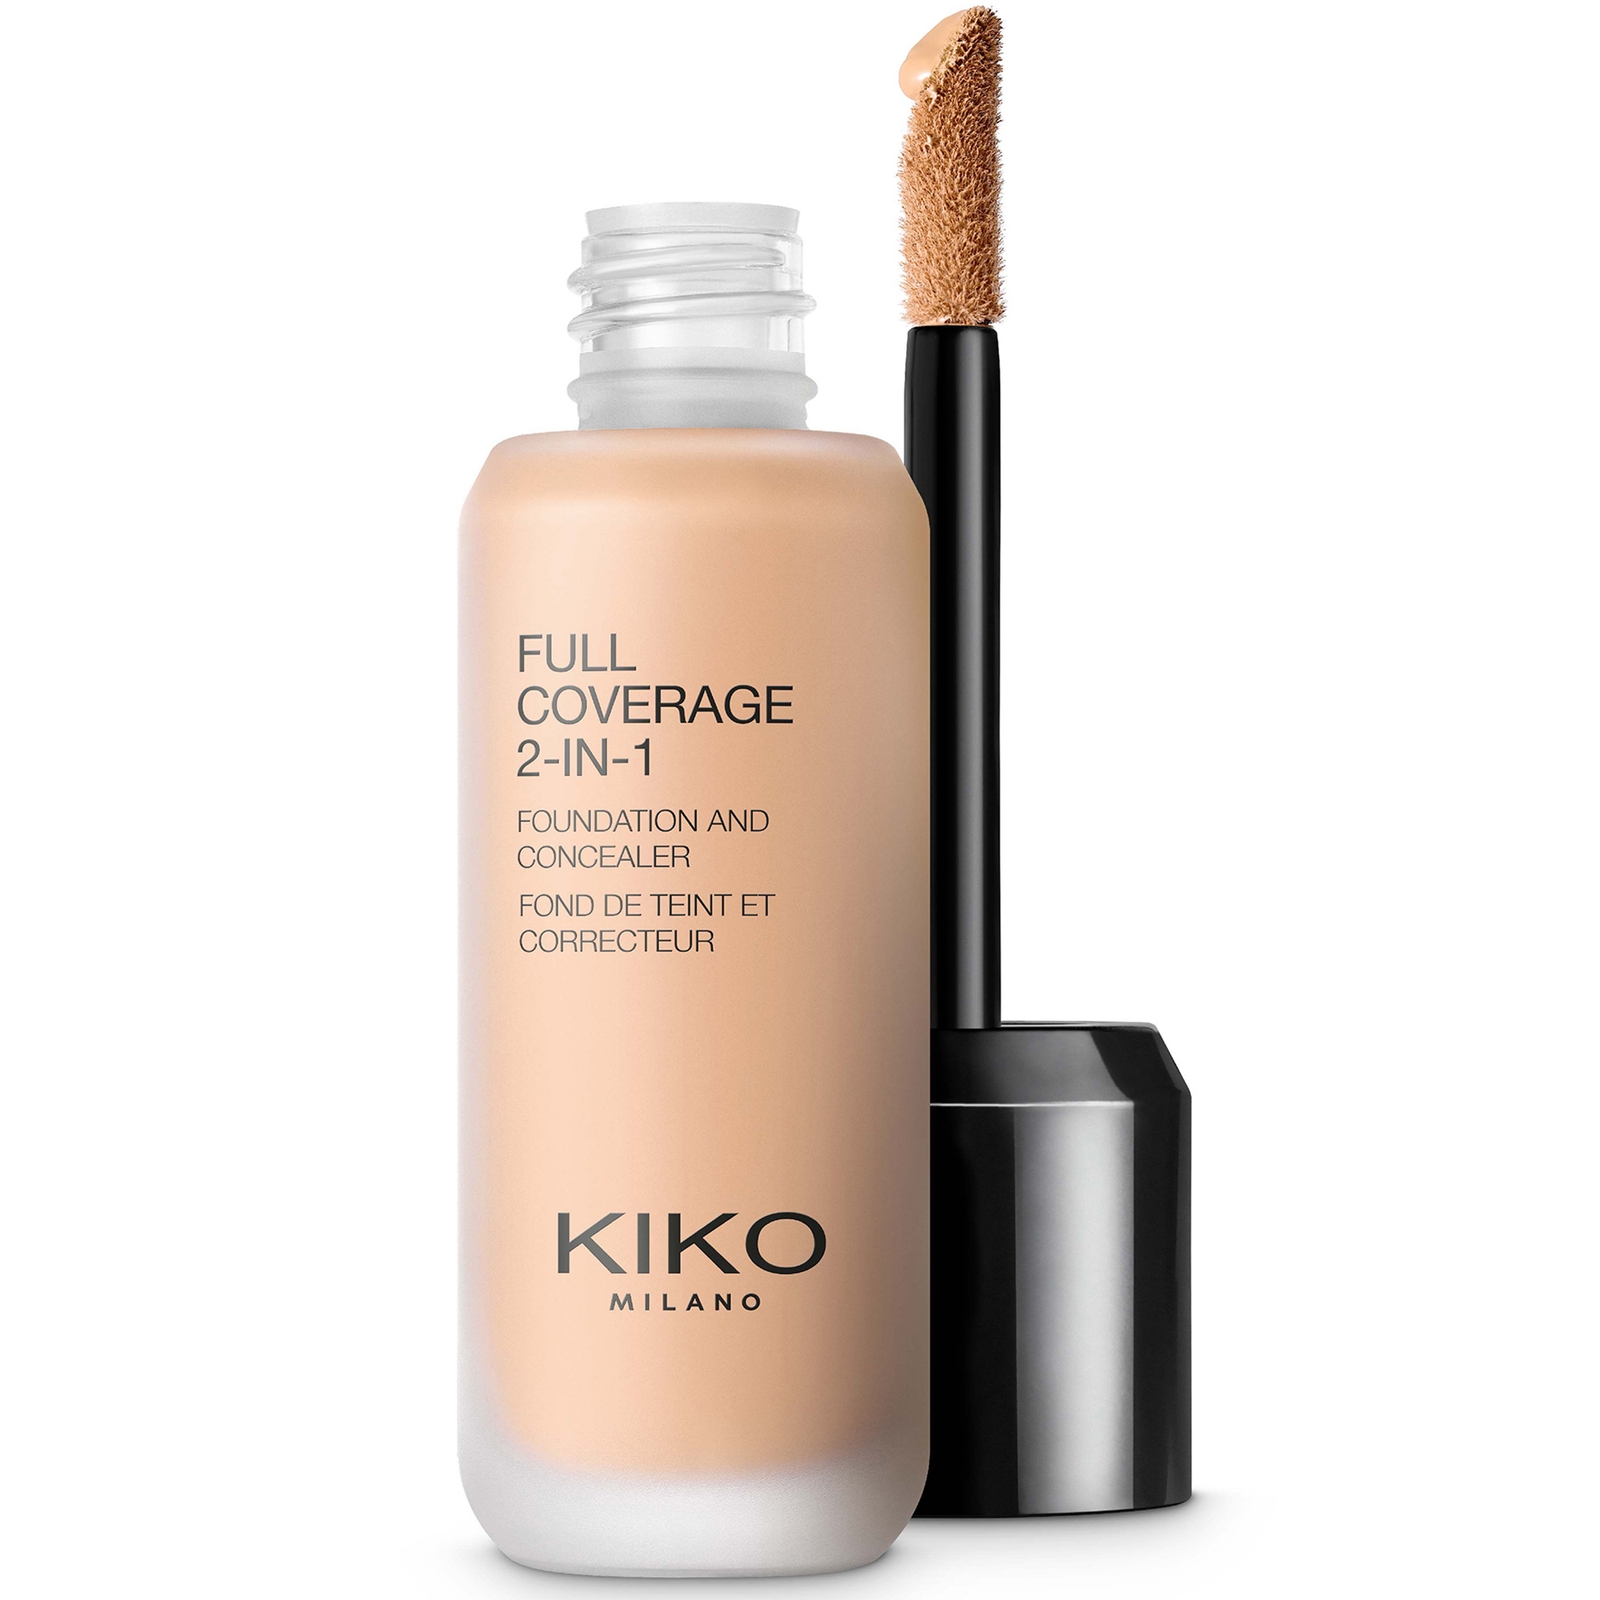 KIKO Milano Full Coverage 2-in-1 Foundation and Concealer 25ml (Various Shades) - 30 Warm Rose